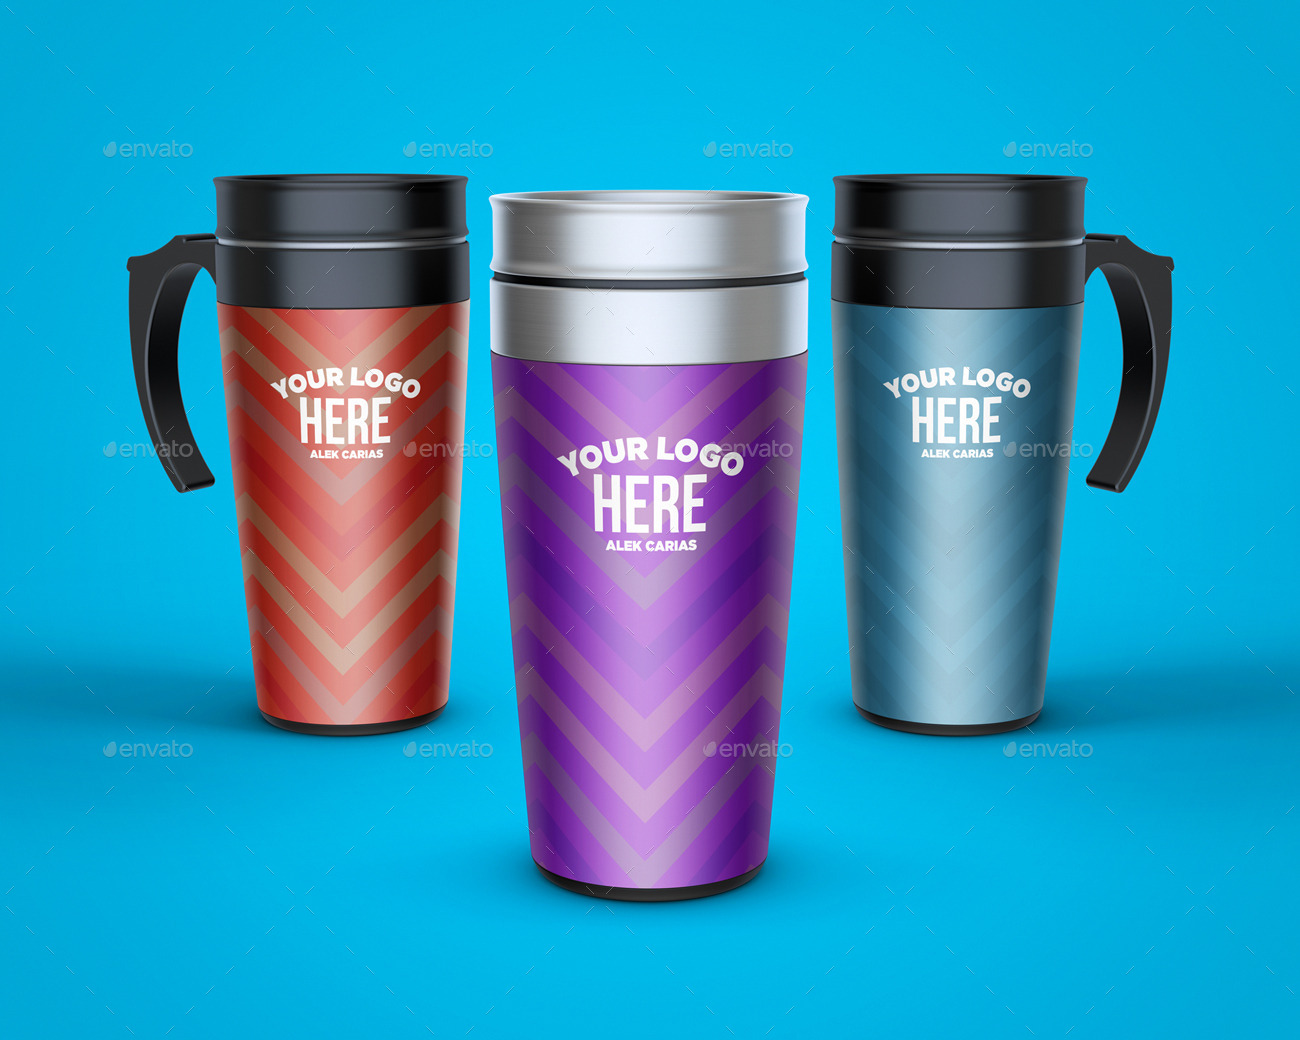 Download 55+ Free Awesome and Professional PSD Cup/ Mug Mockups for ... PSD Mockup Templates